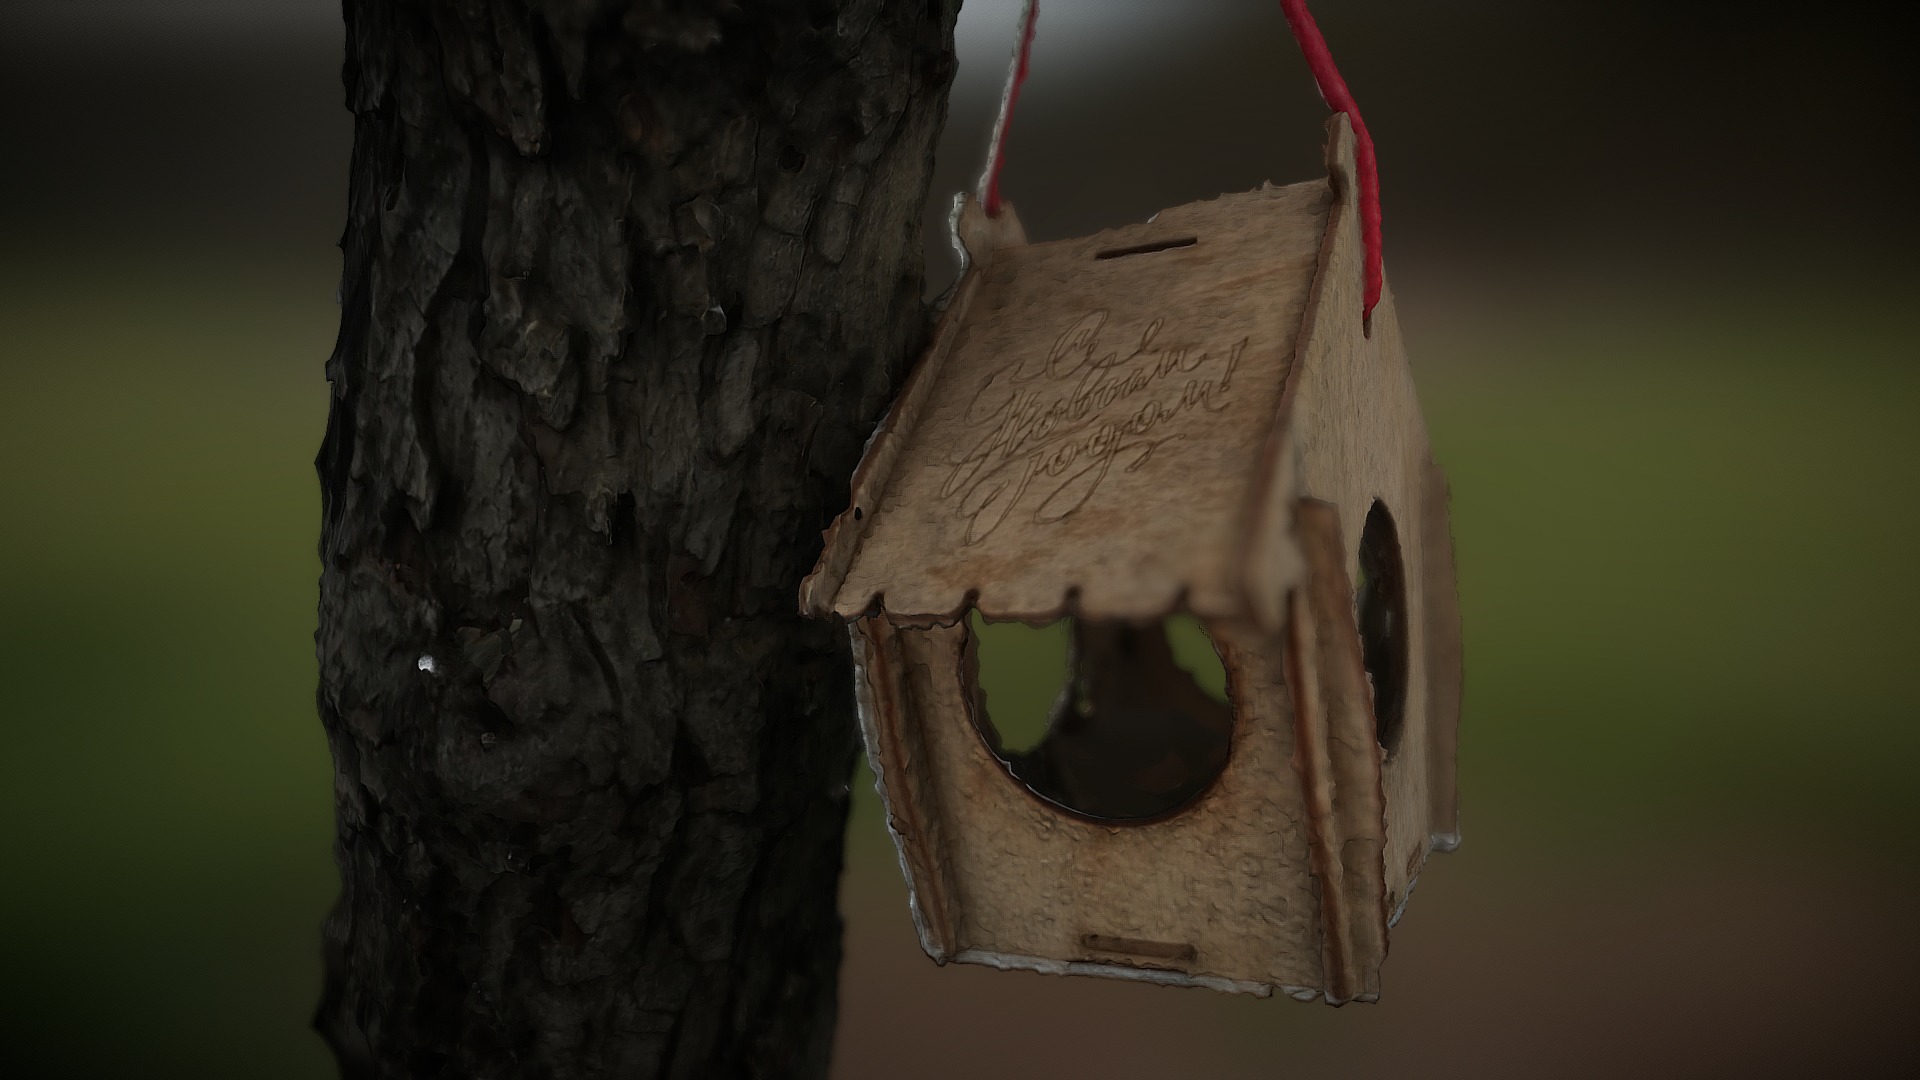 3D model Birdhouse - This is a 3D model of the Birdhouse. The 3D model is about a birdhouse on a tree.